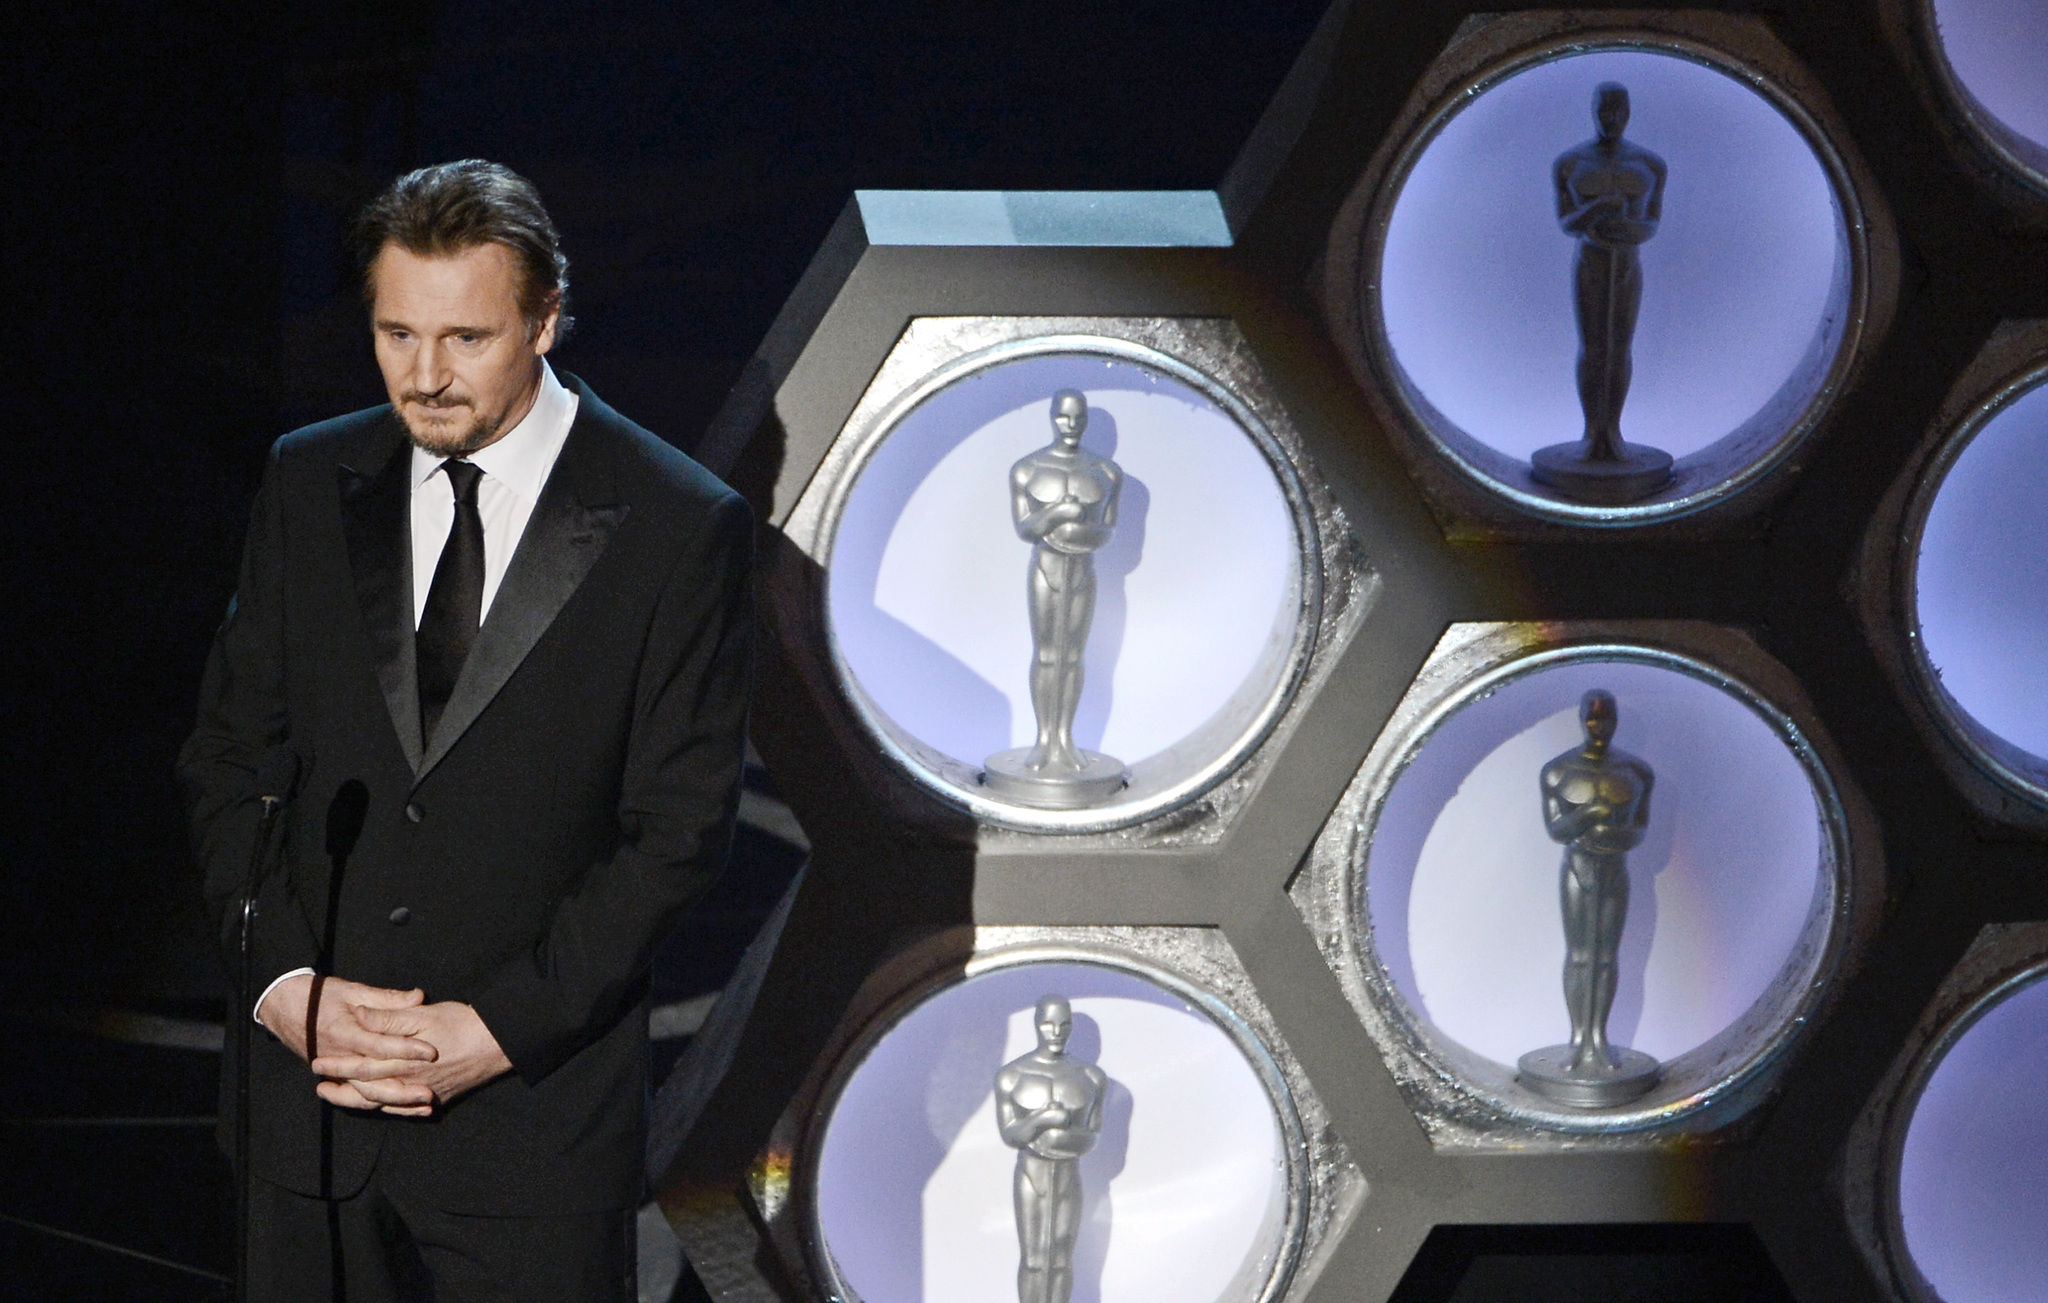 Liam Neeson at event of The Oscars (2013)